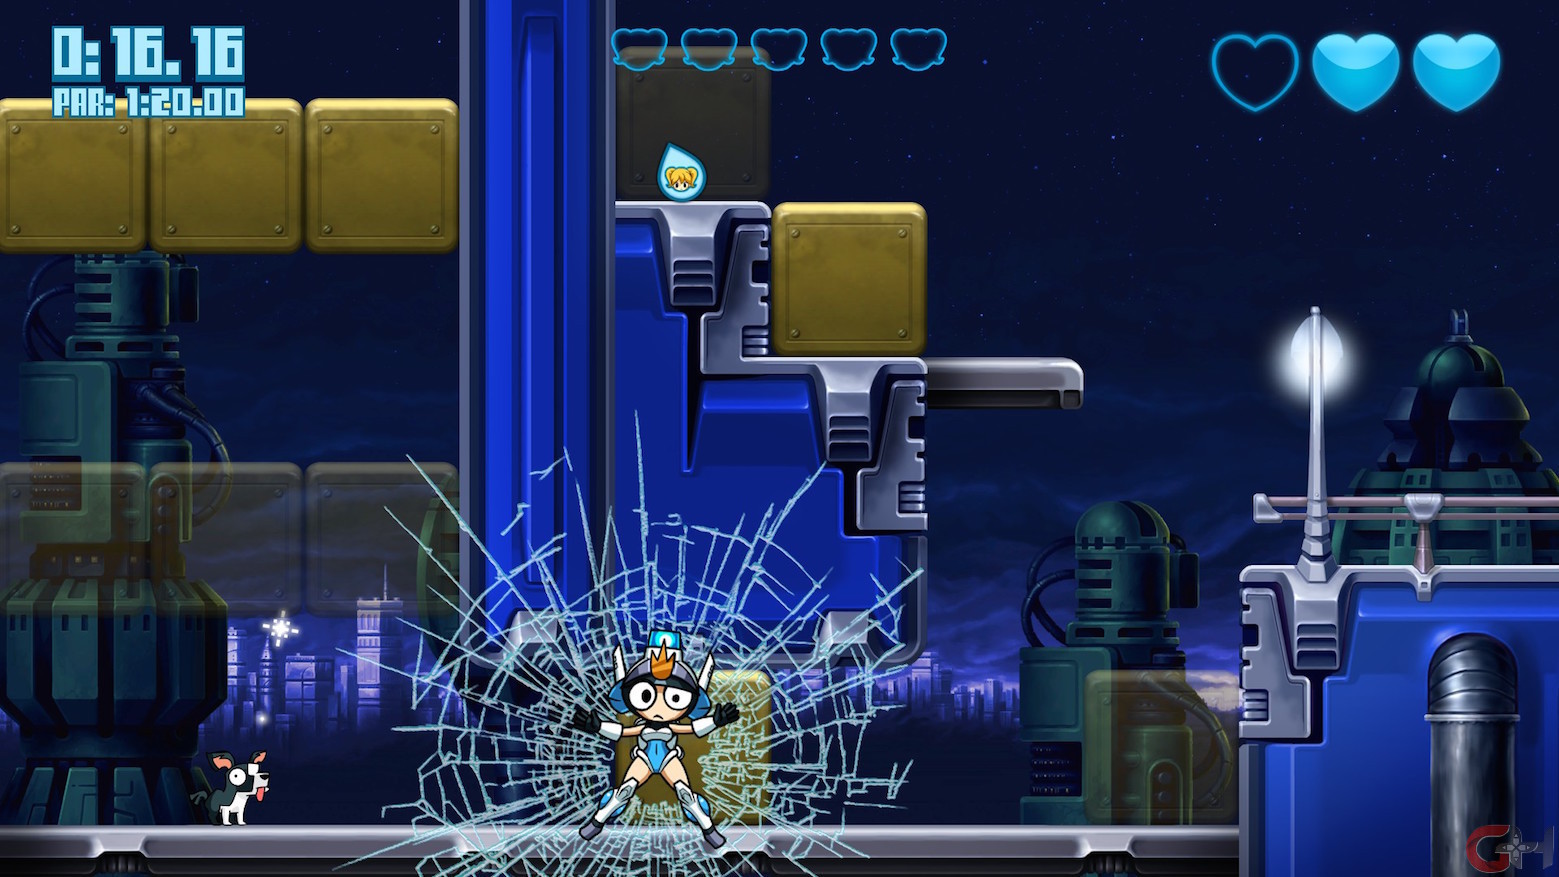 Mighty Switch Force! Hyper Drive Edition #26